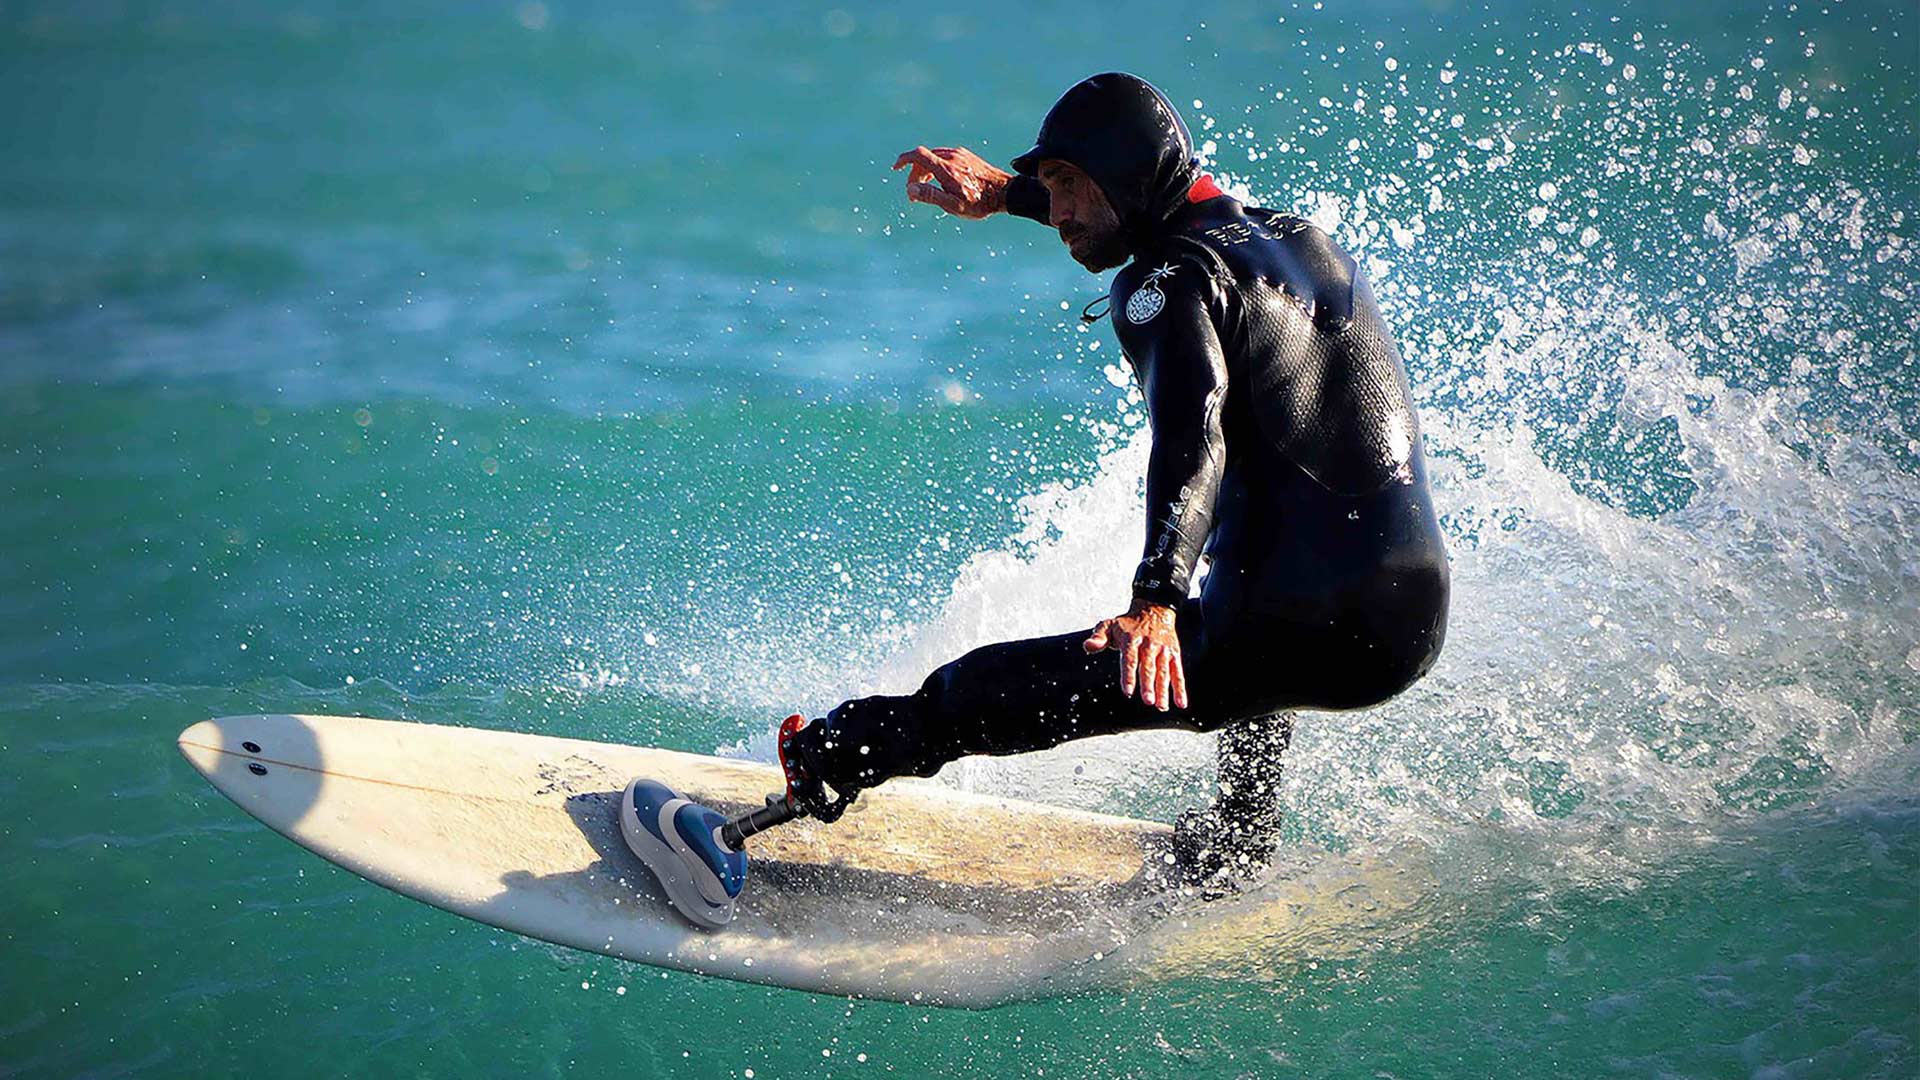 A surfer catches a wave while wearing a black, full-body wetsuit and a rendering of the Swell Surf Foot prosthetic.